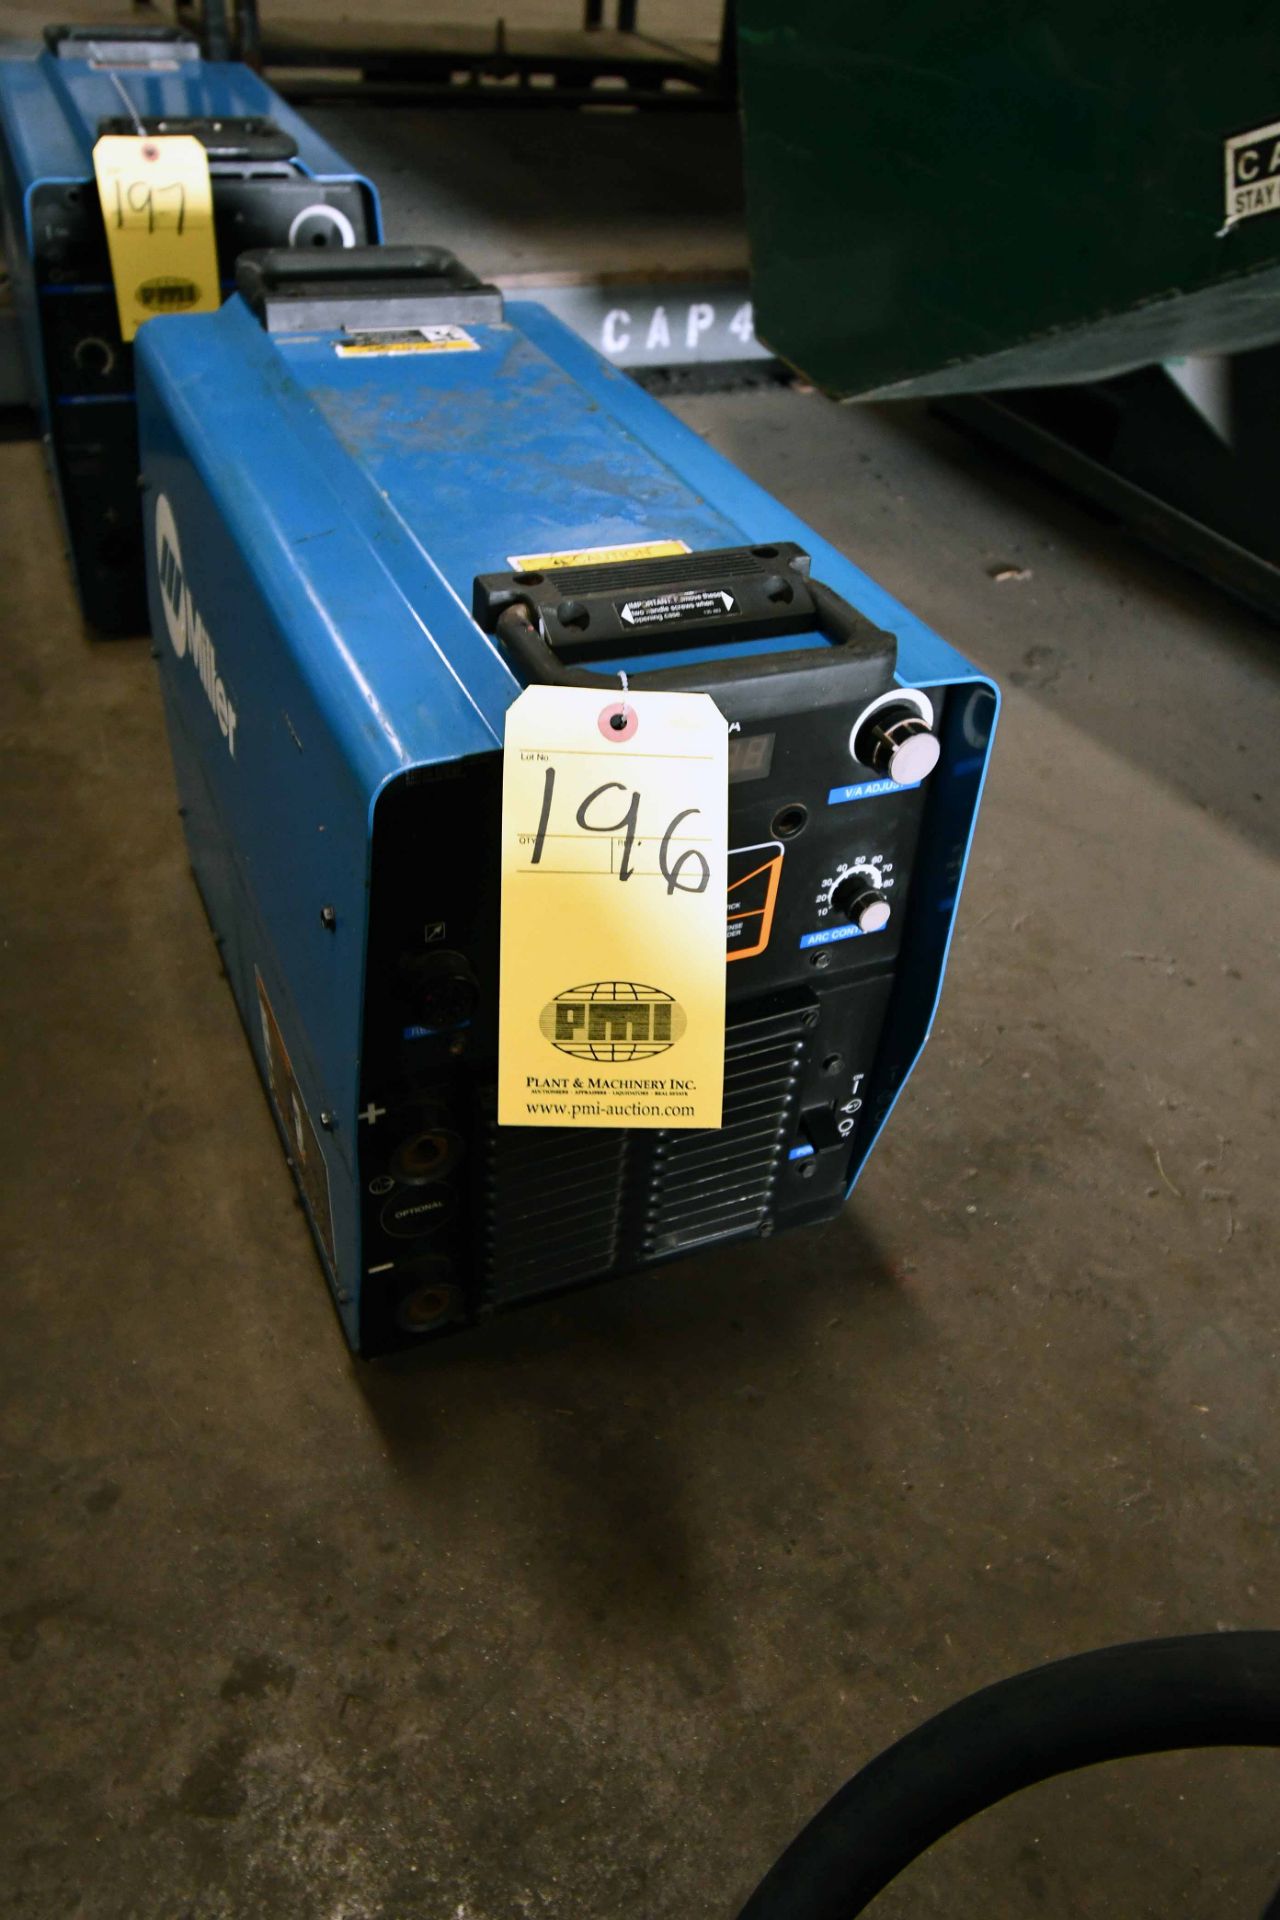 WELDING POWER SOURCE, MILLER XMT 304 CC/CV, new 2008, 32 v., 300 amp @ 60% duty cycle, S/N